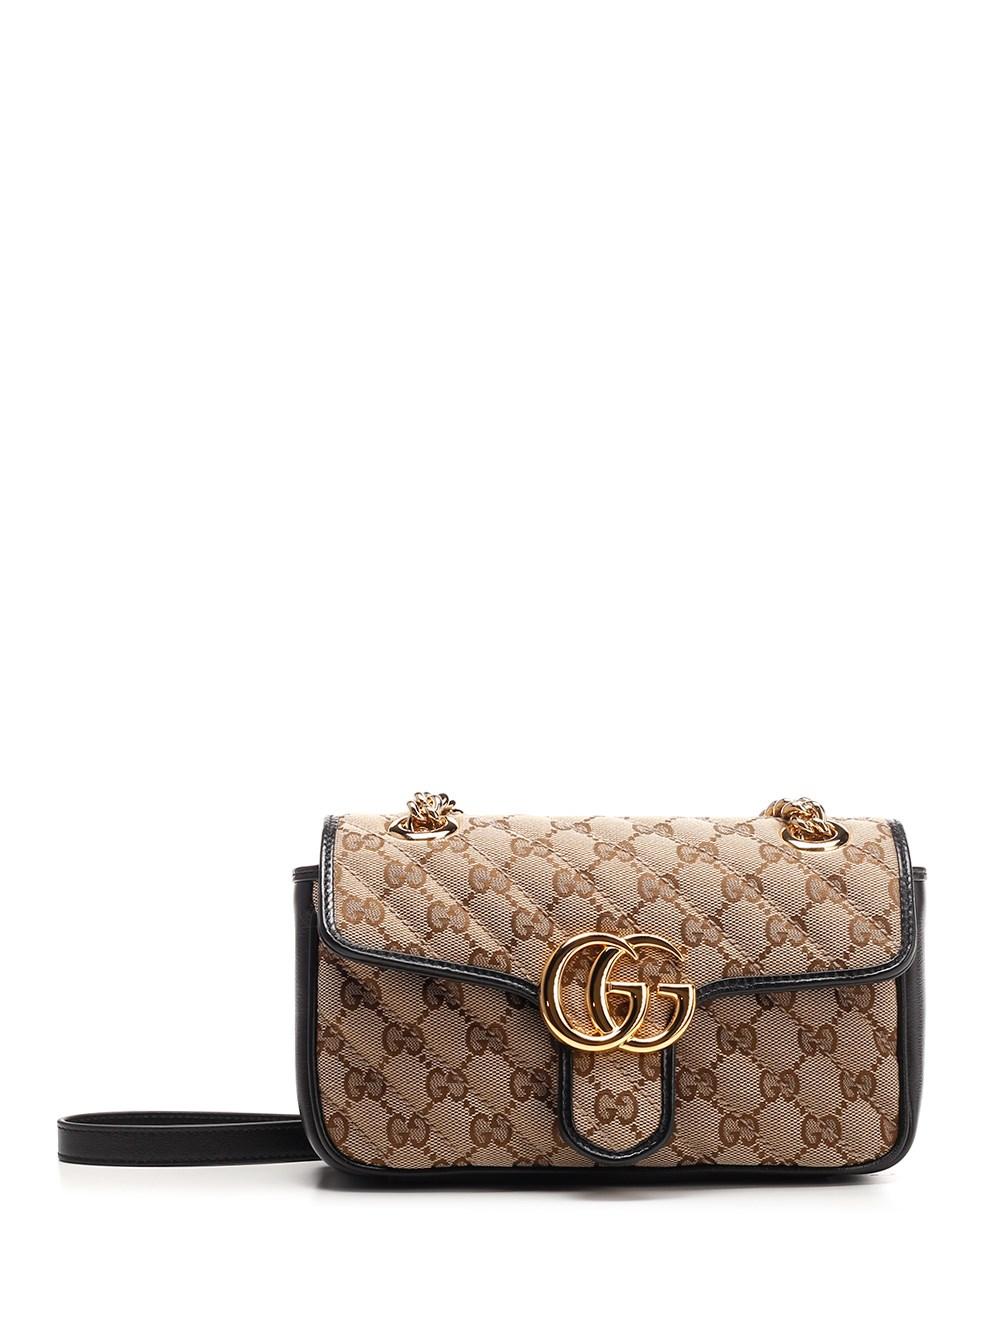 GUCCI GG Marmont Diagonal Leather Crossbody Bag Brown